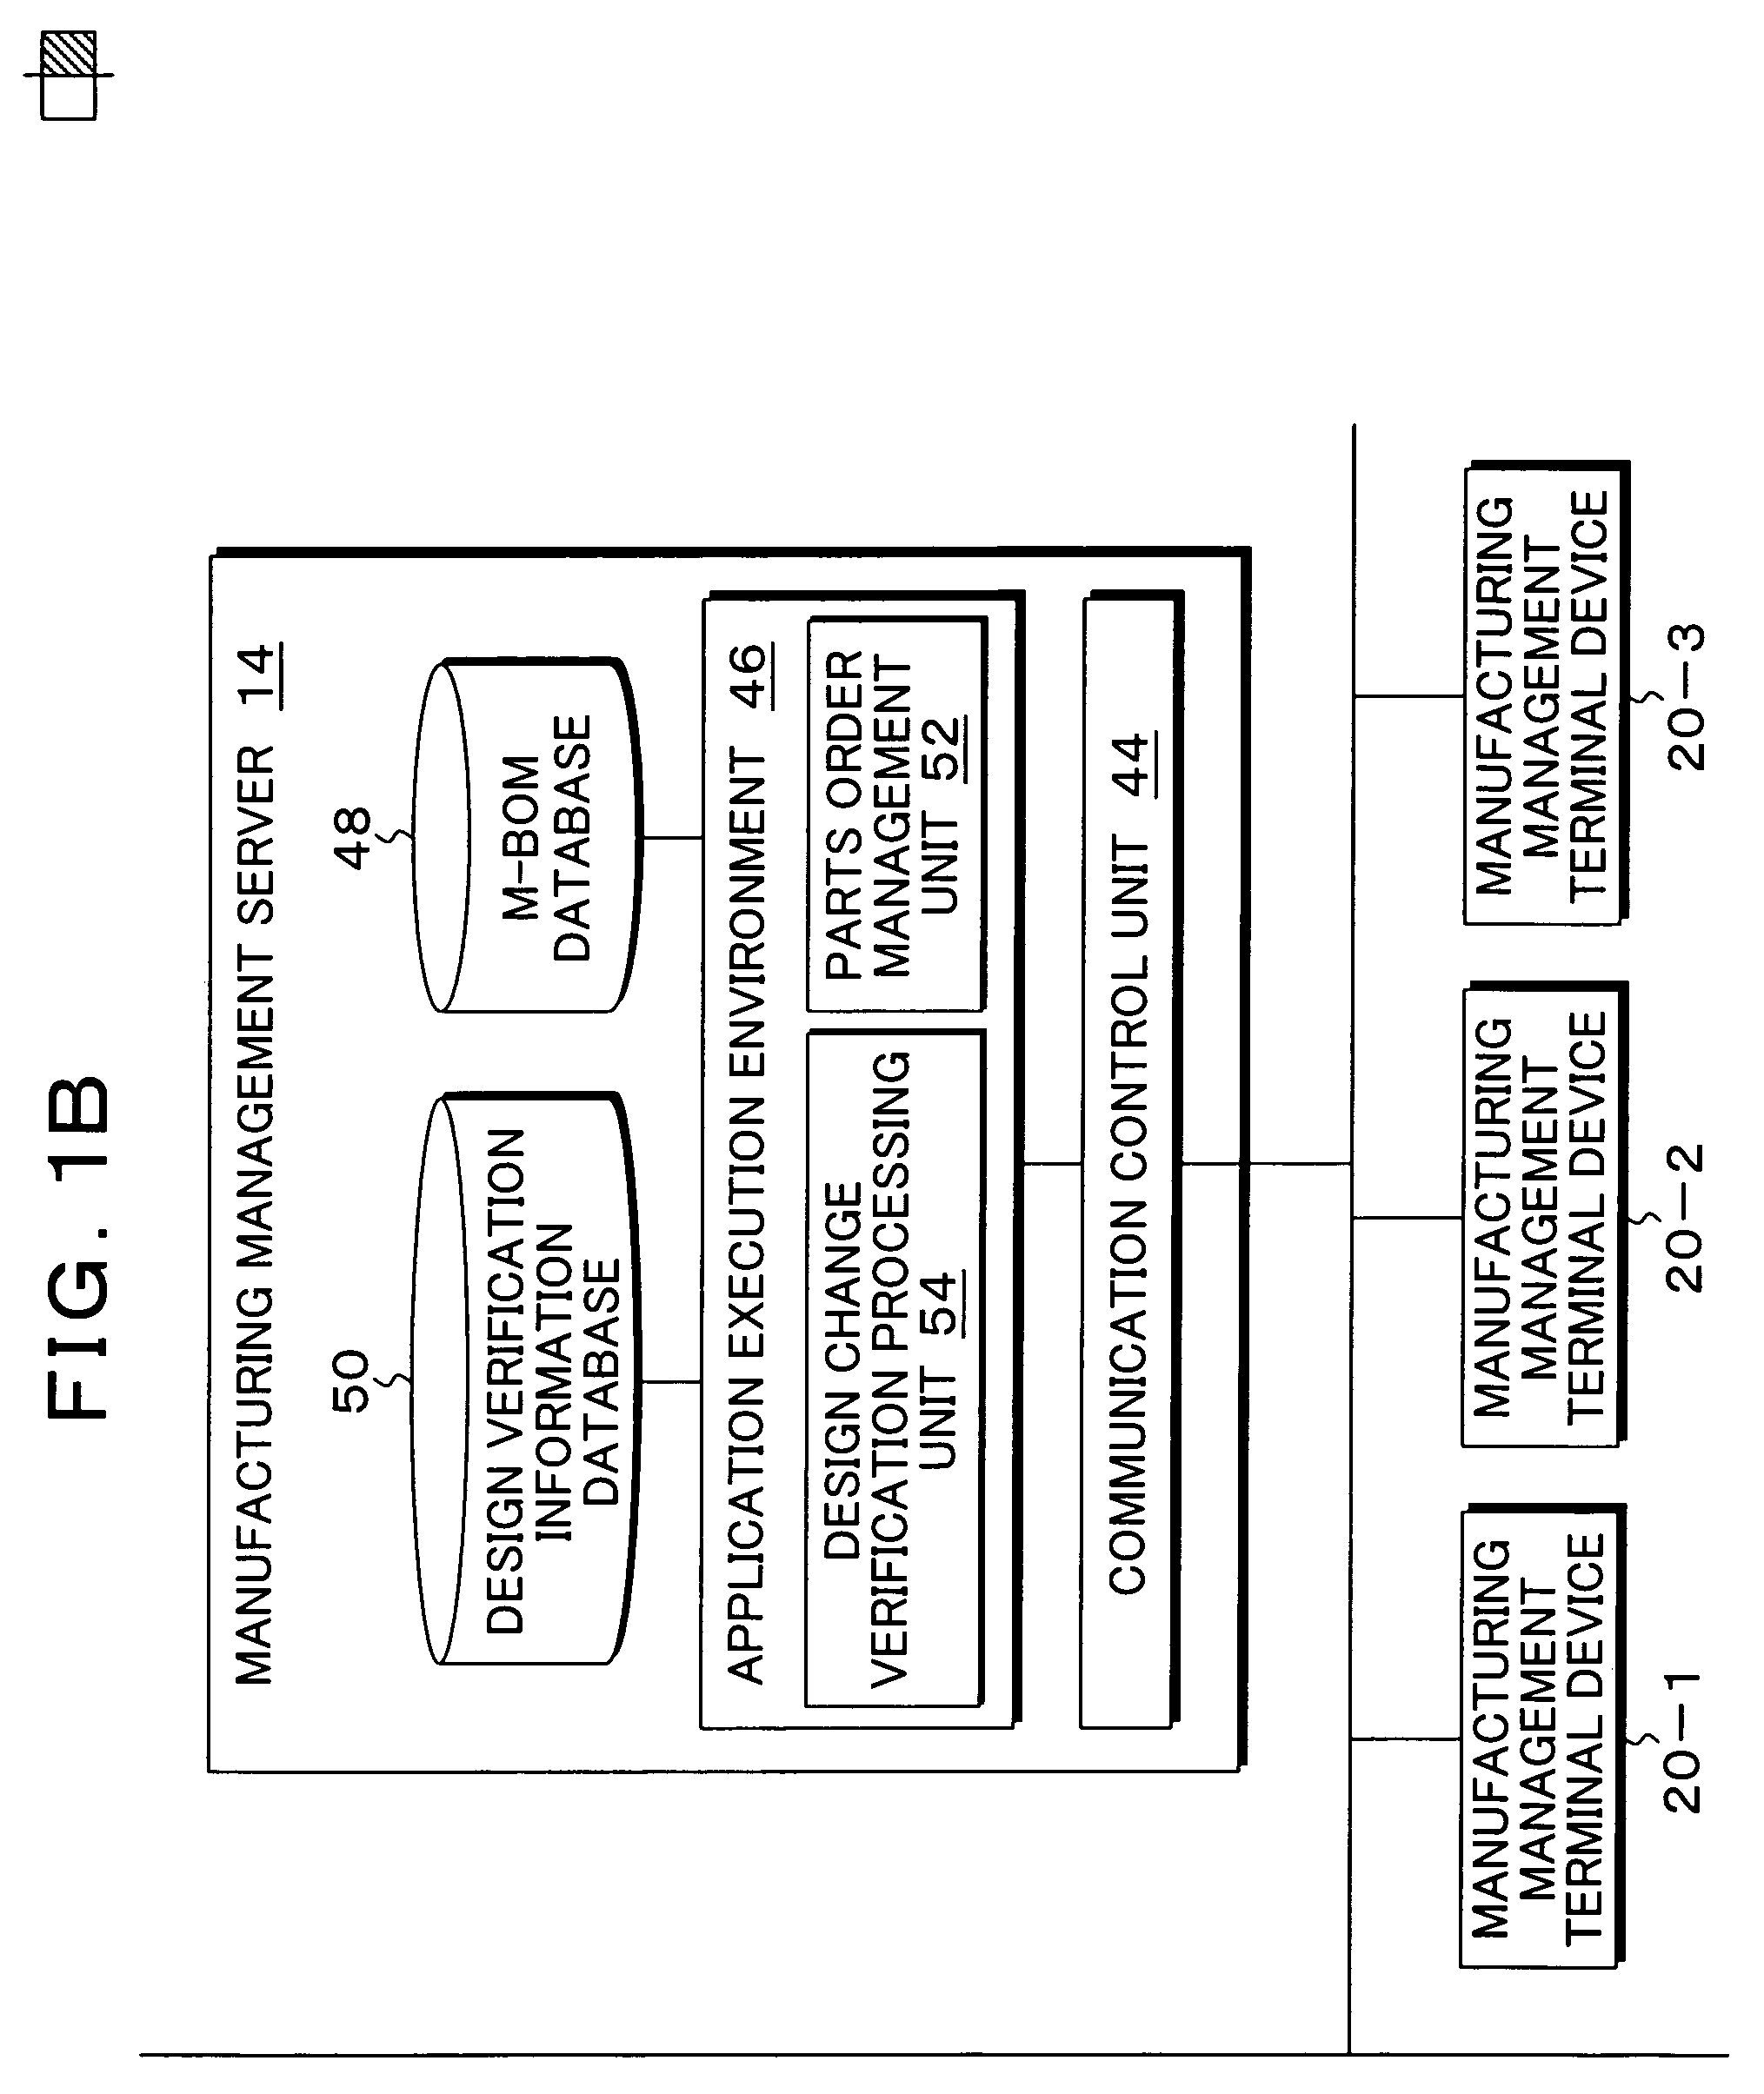 Design and manufacturing management system, method, and program